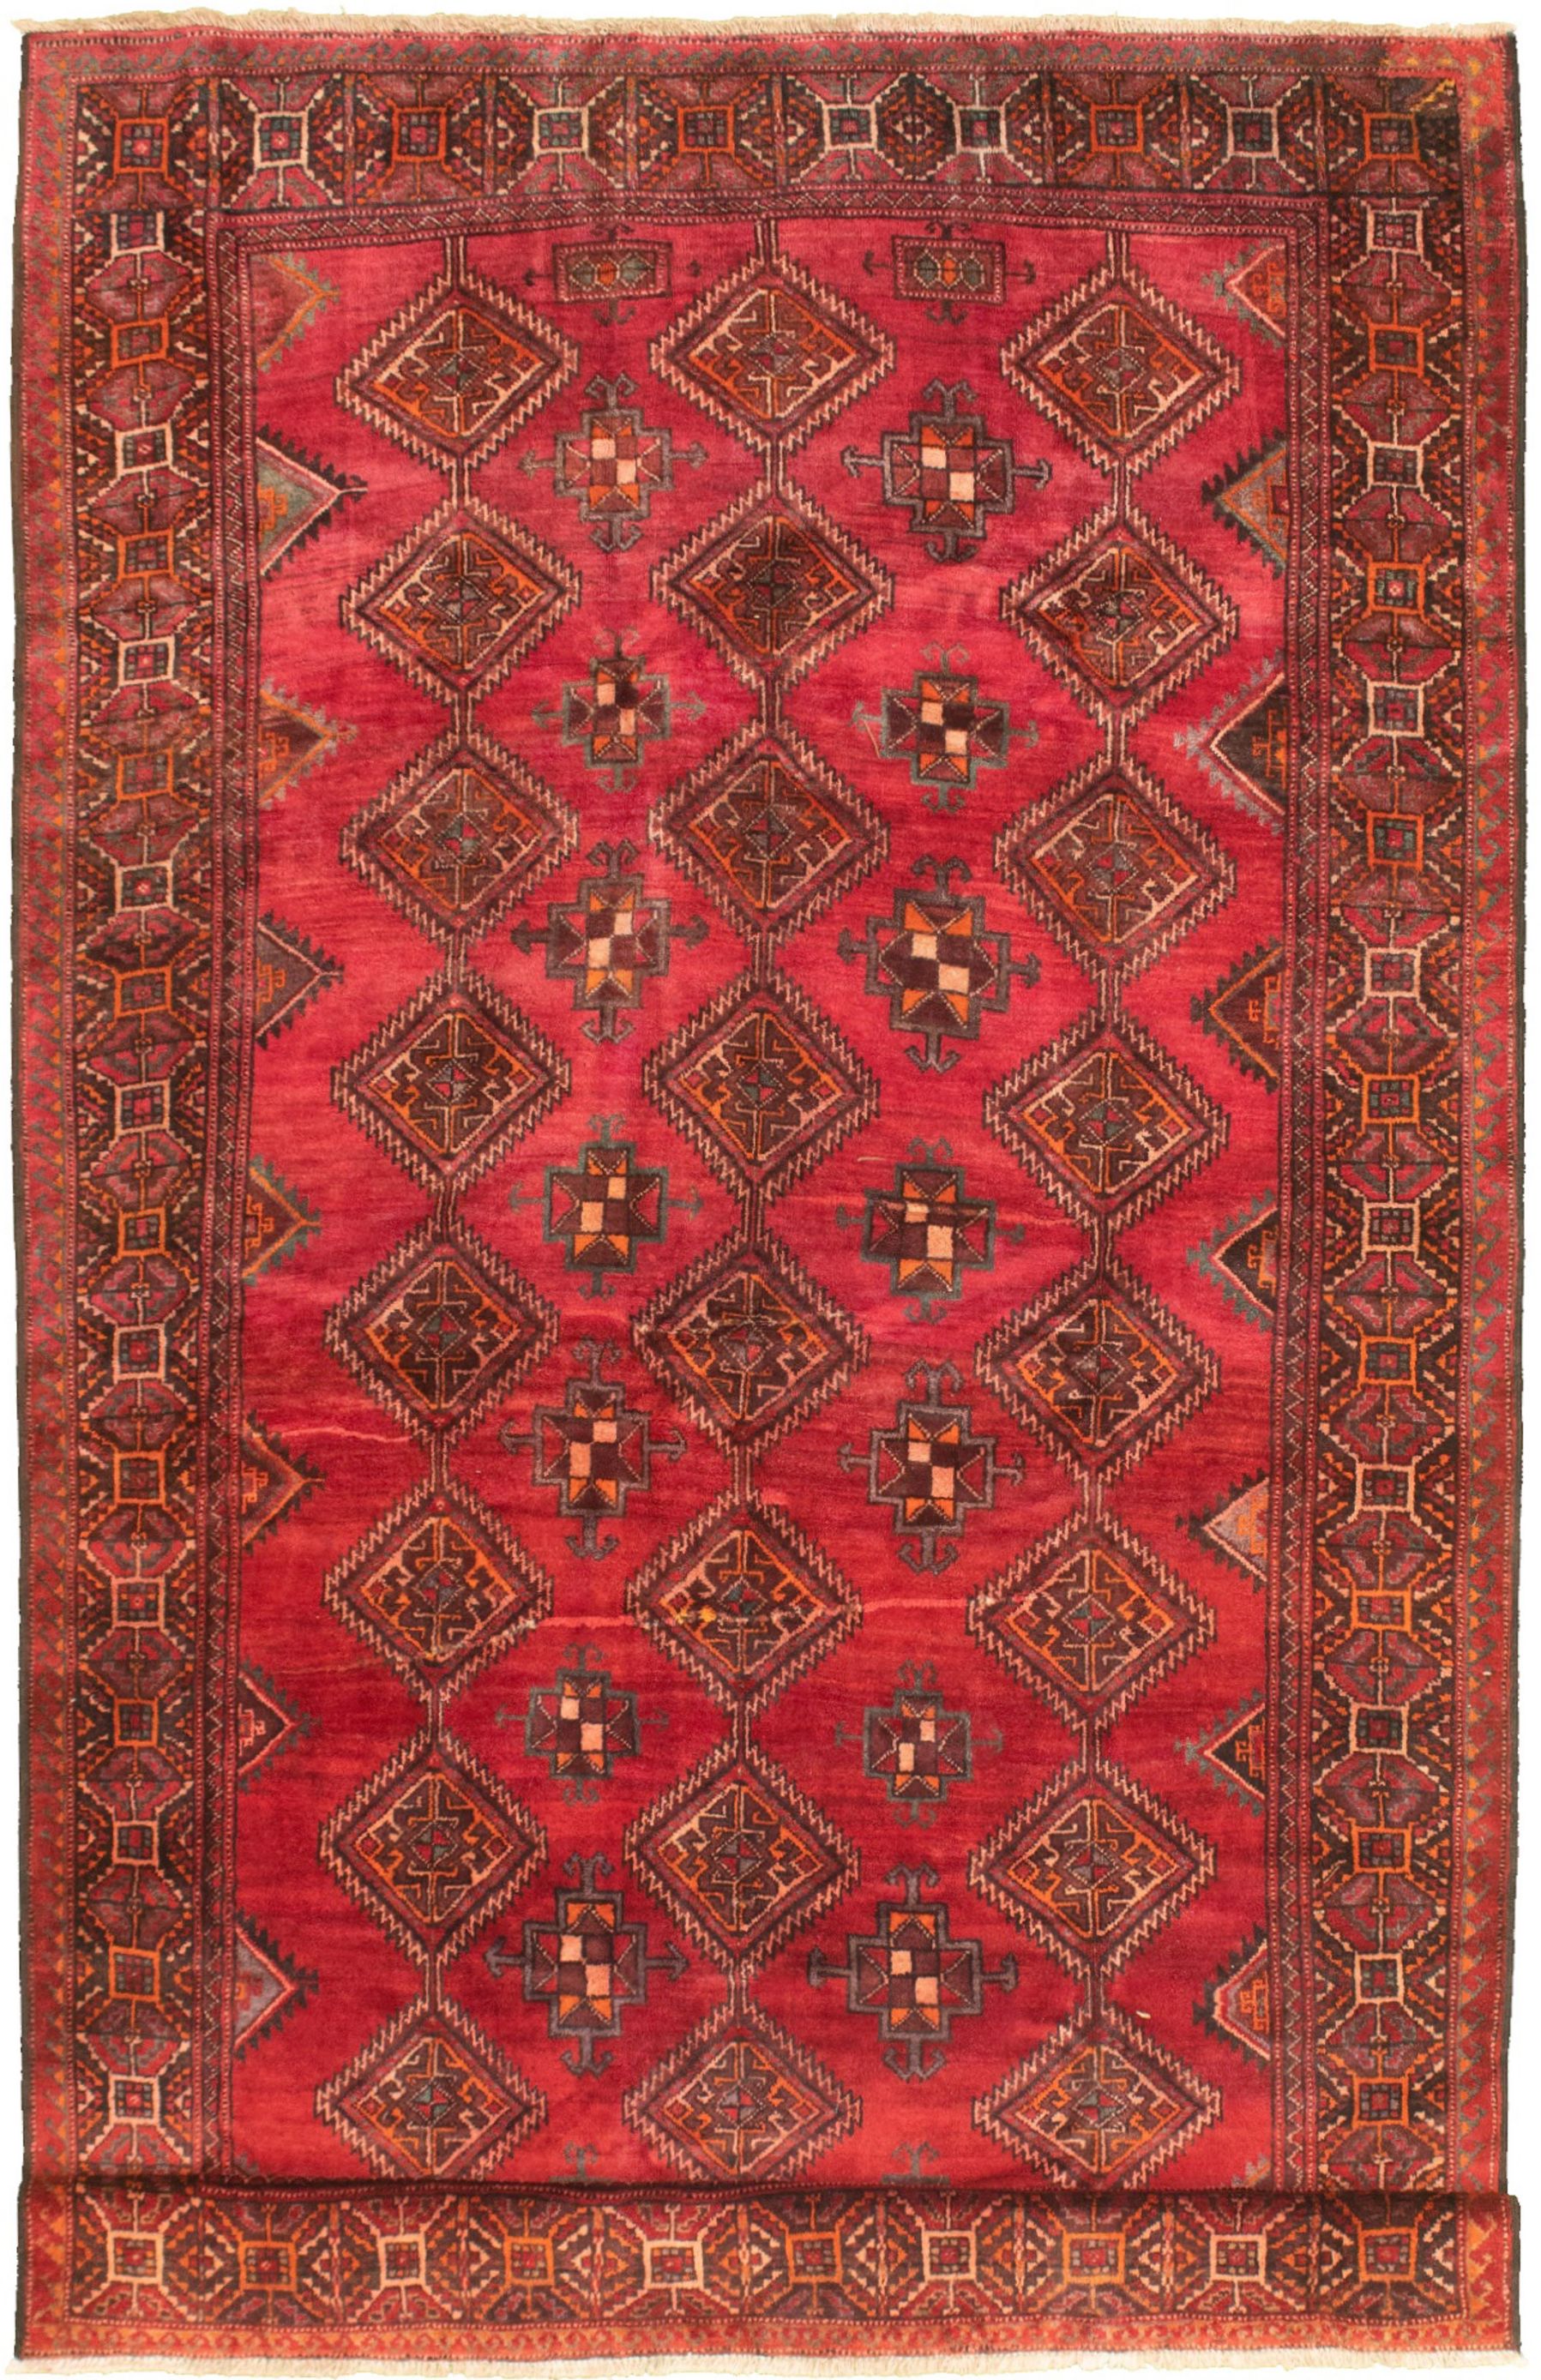 Hand-knotted Authentic Turkish Red Wool Rug 5'8" x 10'4"  Size: 5'8" x 10'4"  